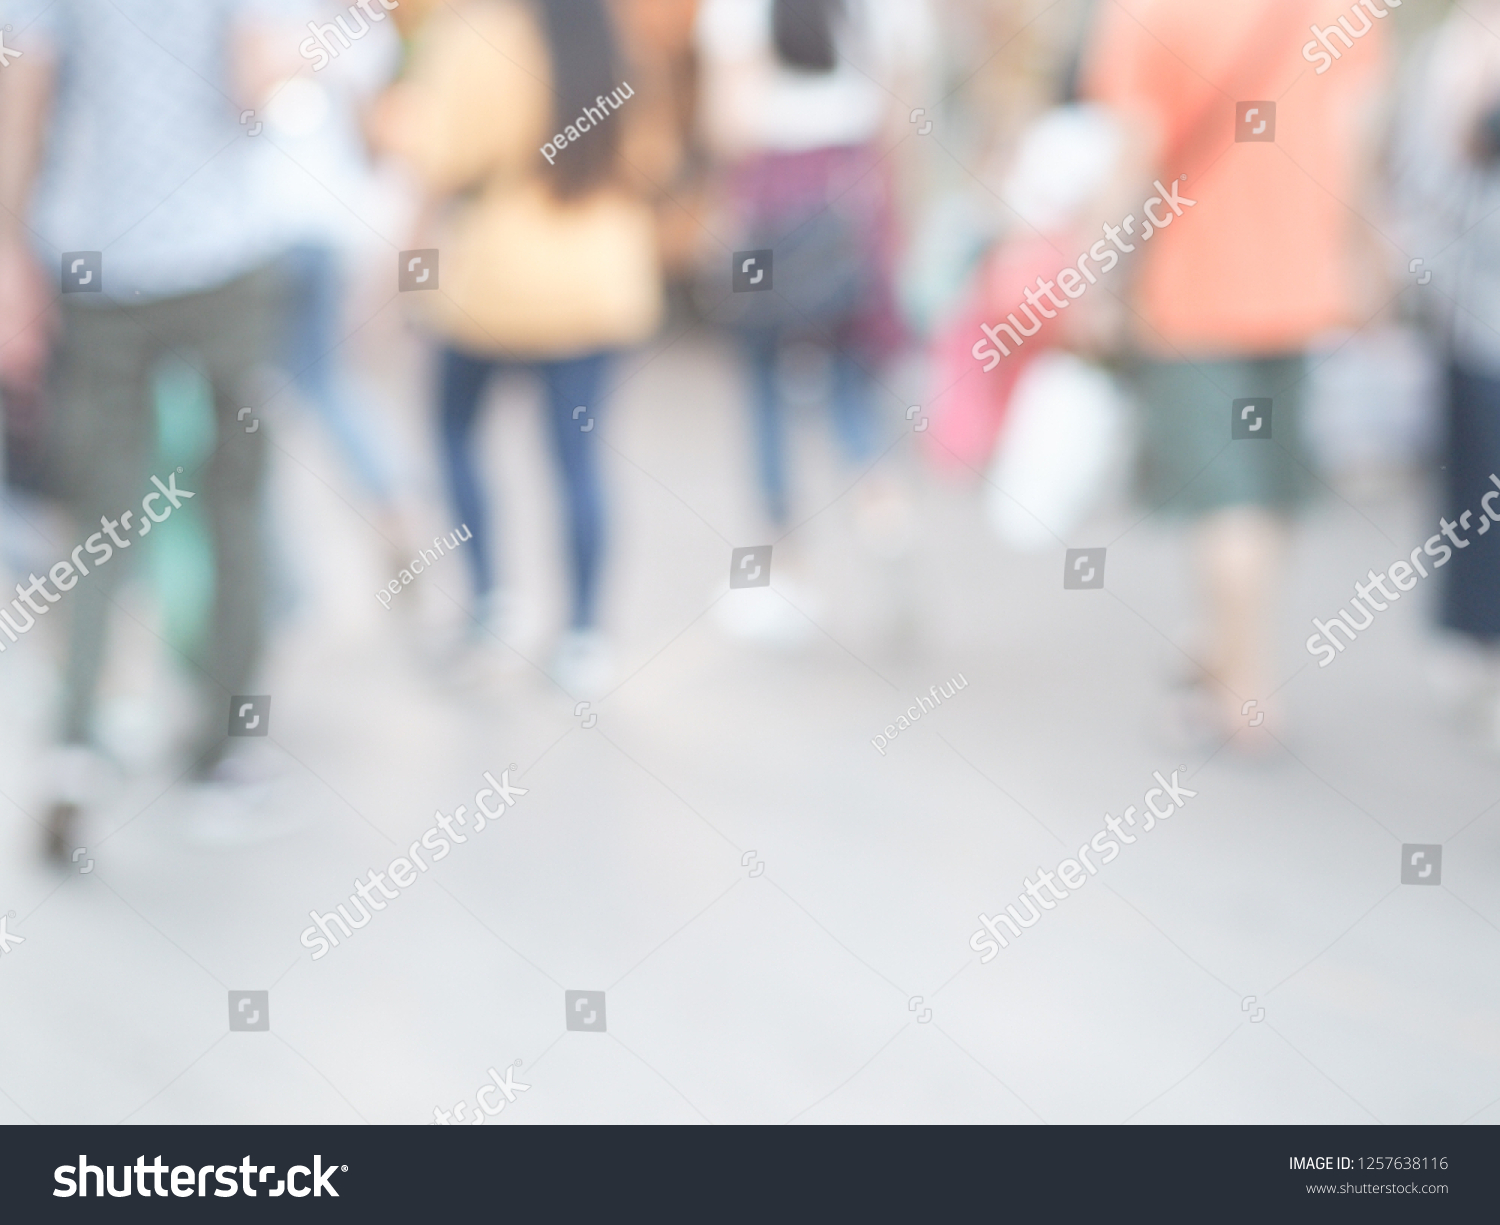 Blurred photo. Close up group of people walking. long and short pants. sneakers. sandal. tourists. rear view. #1257638116